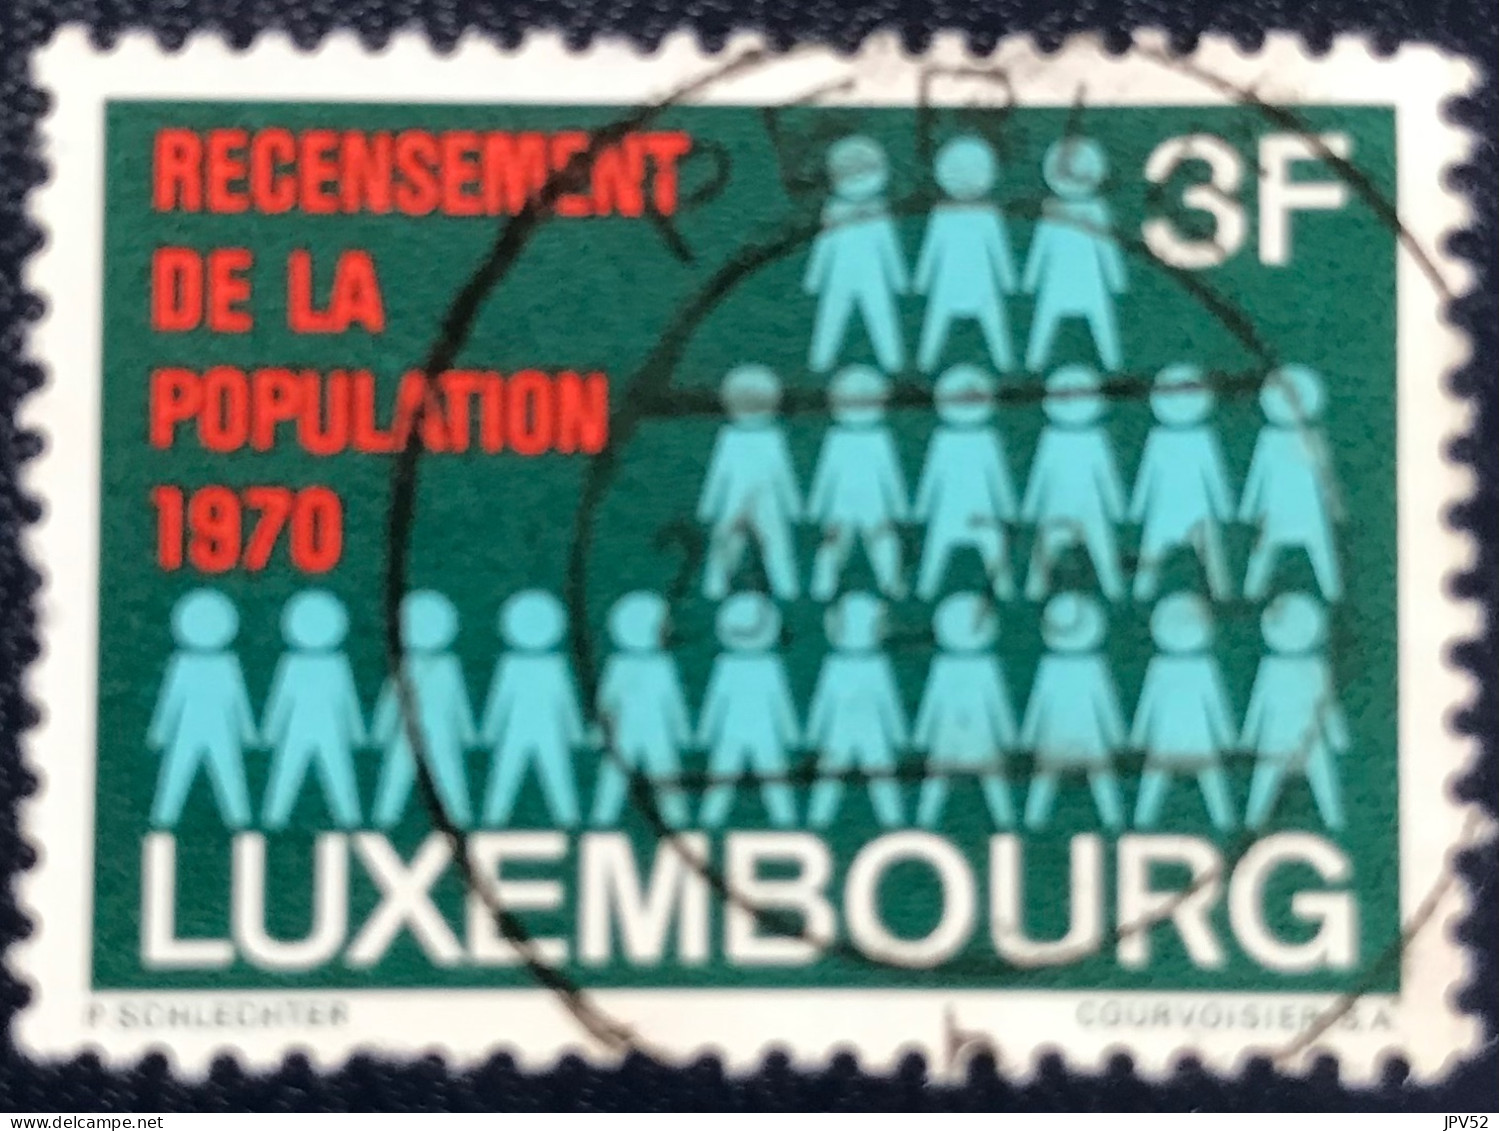 Luxembourg - Luxemburg - C18/31 - 1970 - (°)used - Michel 811 - Bevolkingspictogram - Usados